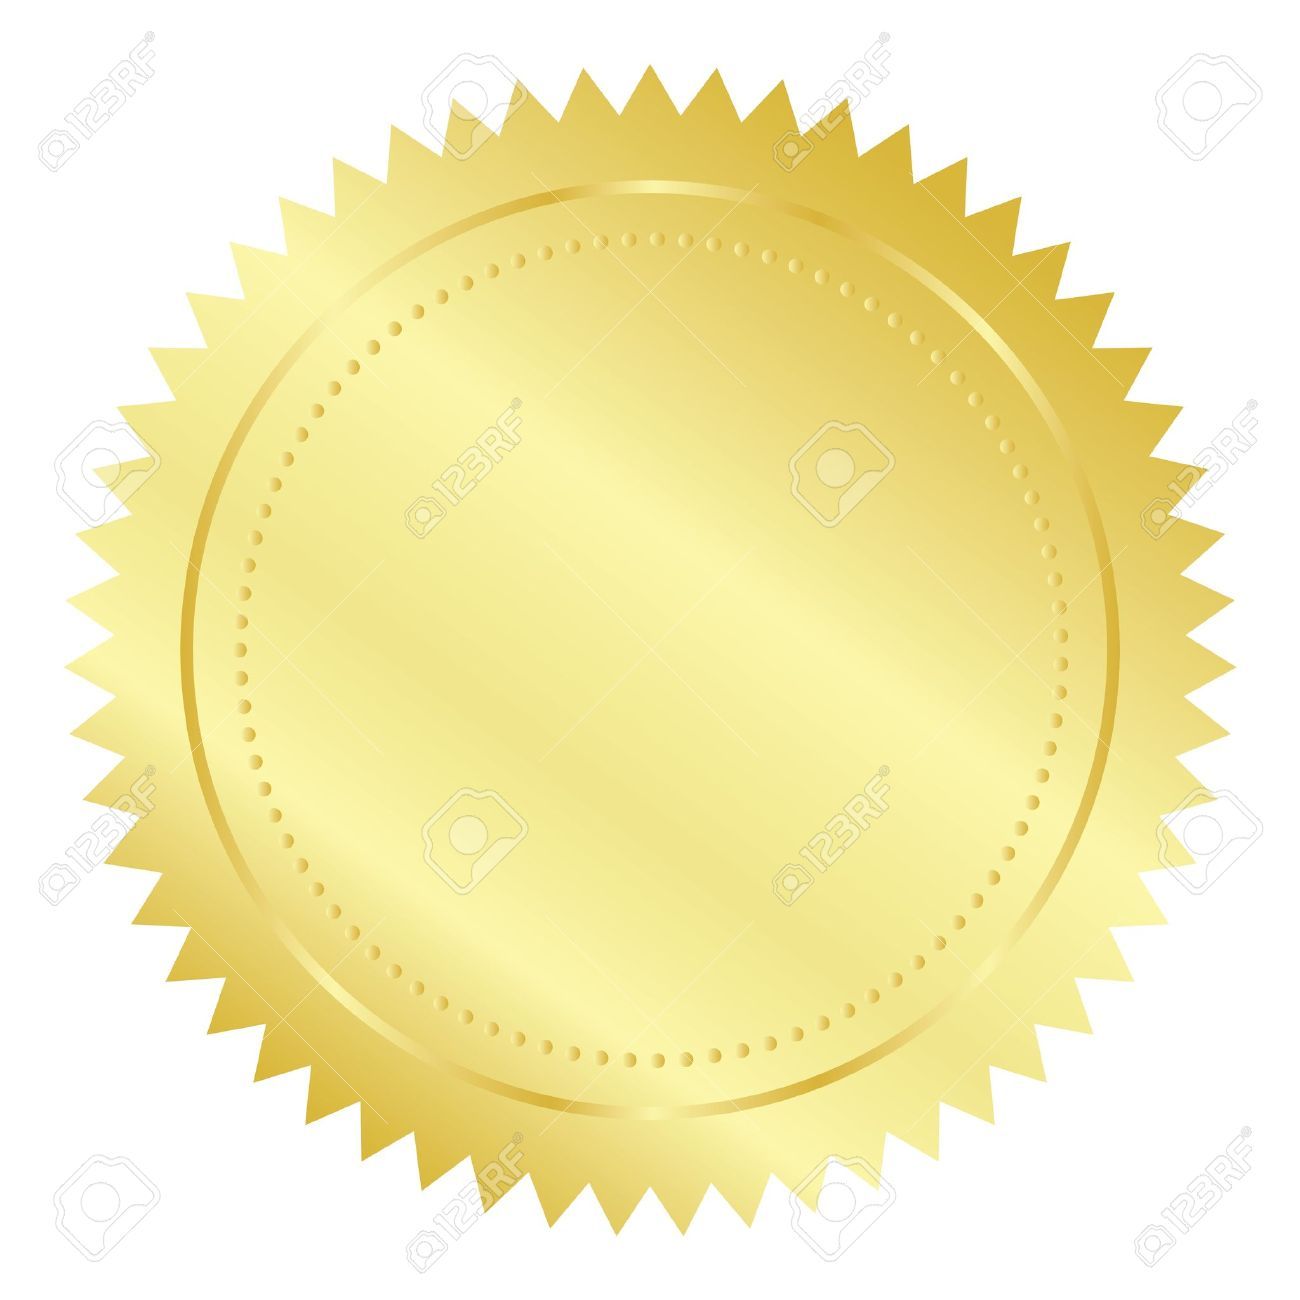 Free gold seal clipart » Clipart Portal.